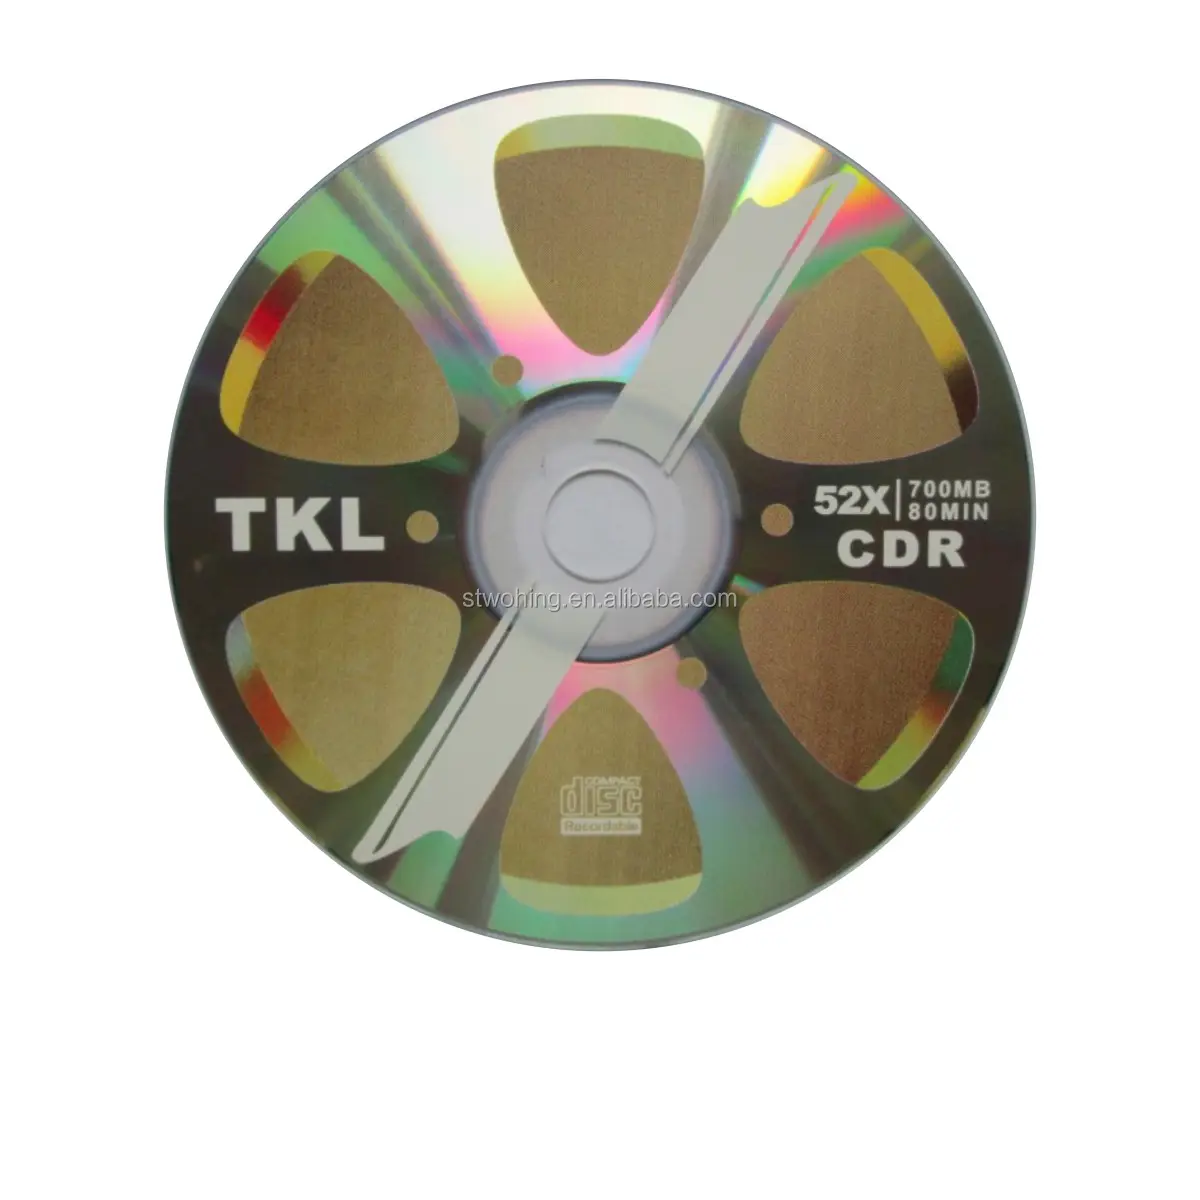 700MB CDR Disk 52X CD Recording Blank Printable CDR disc